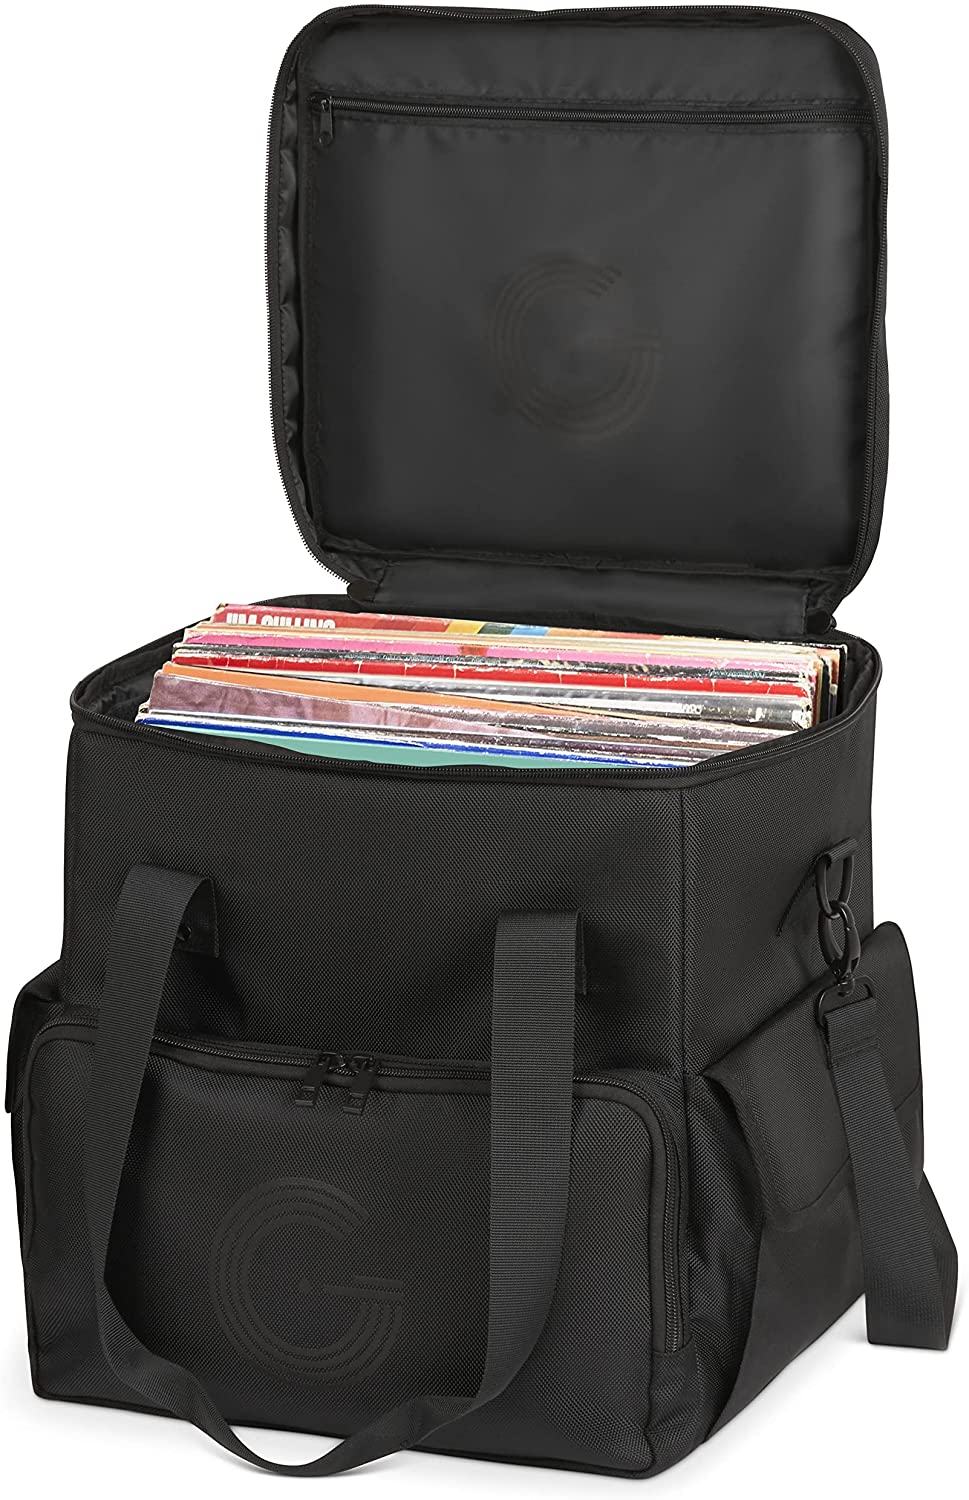 LP Carrying Bag by Legend Vinyl | Travel Vinyl Record Storage Case with Dividers